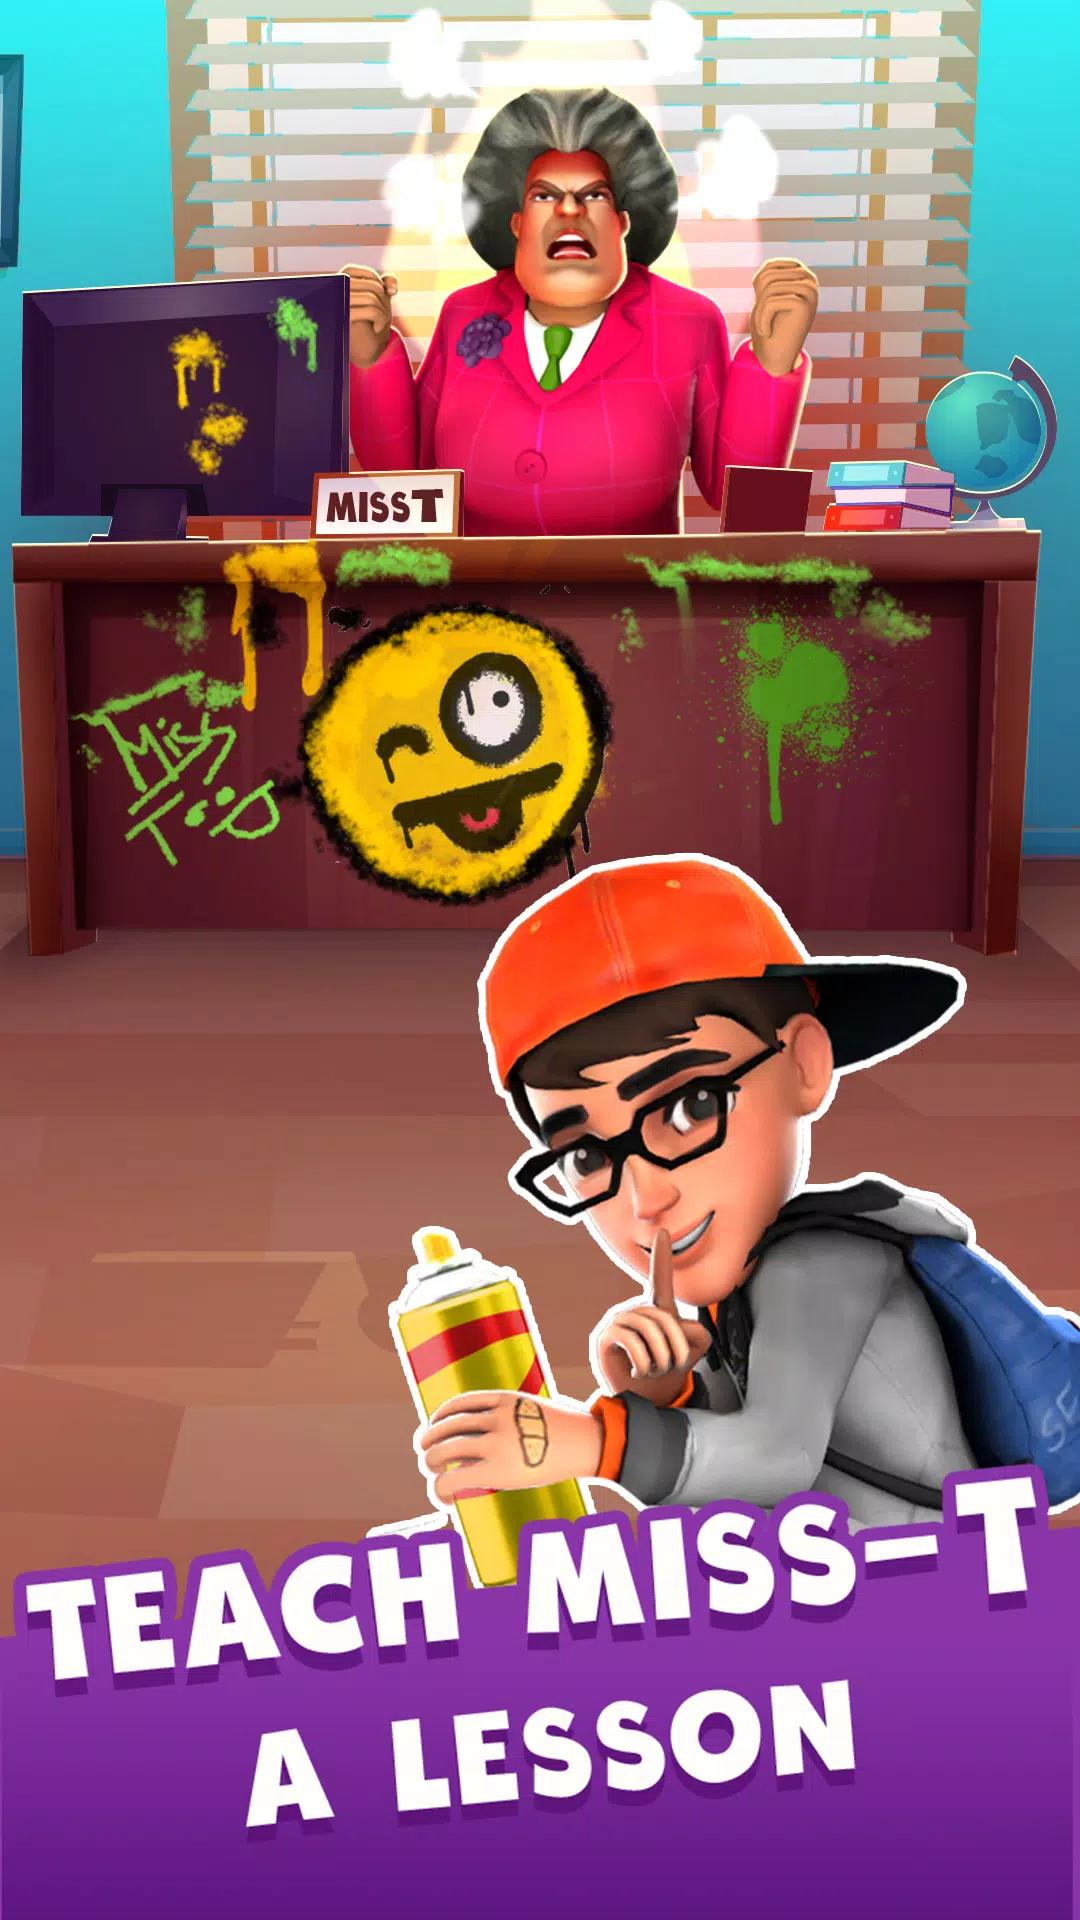 Subway surfers: World tour Moscow Download APK for Android (Free